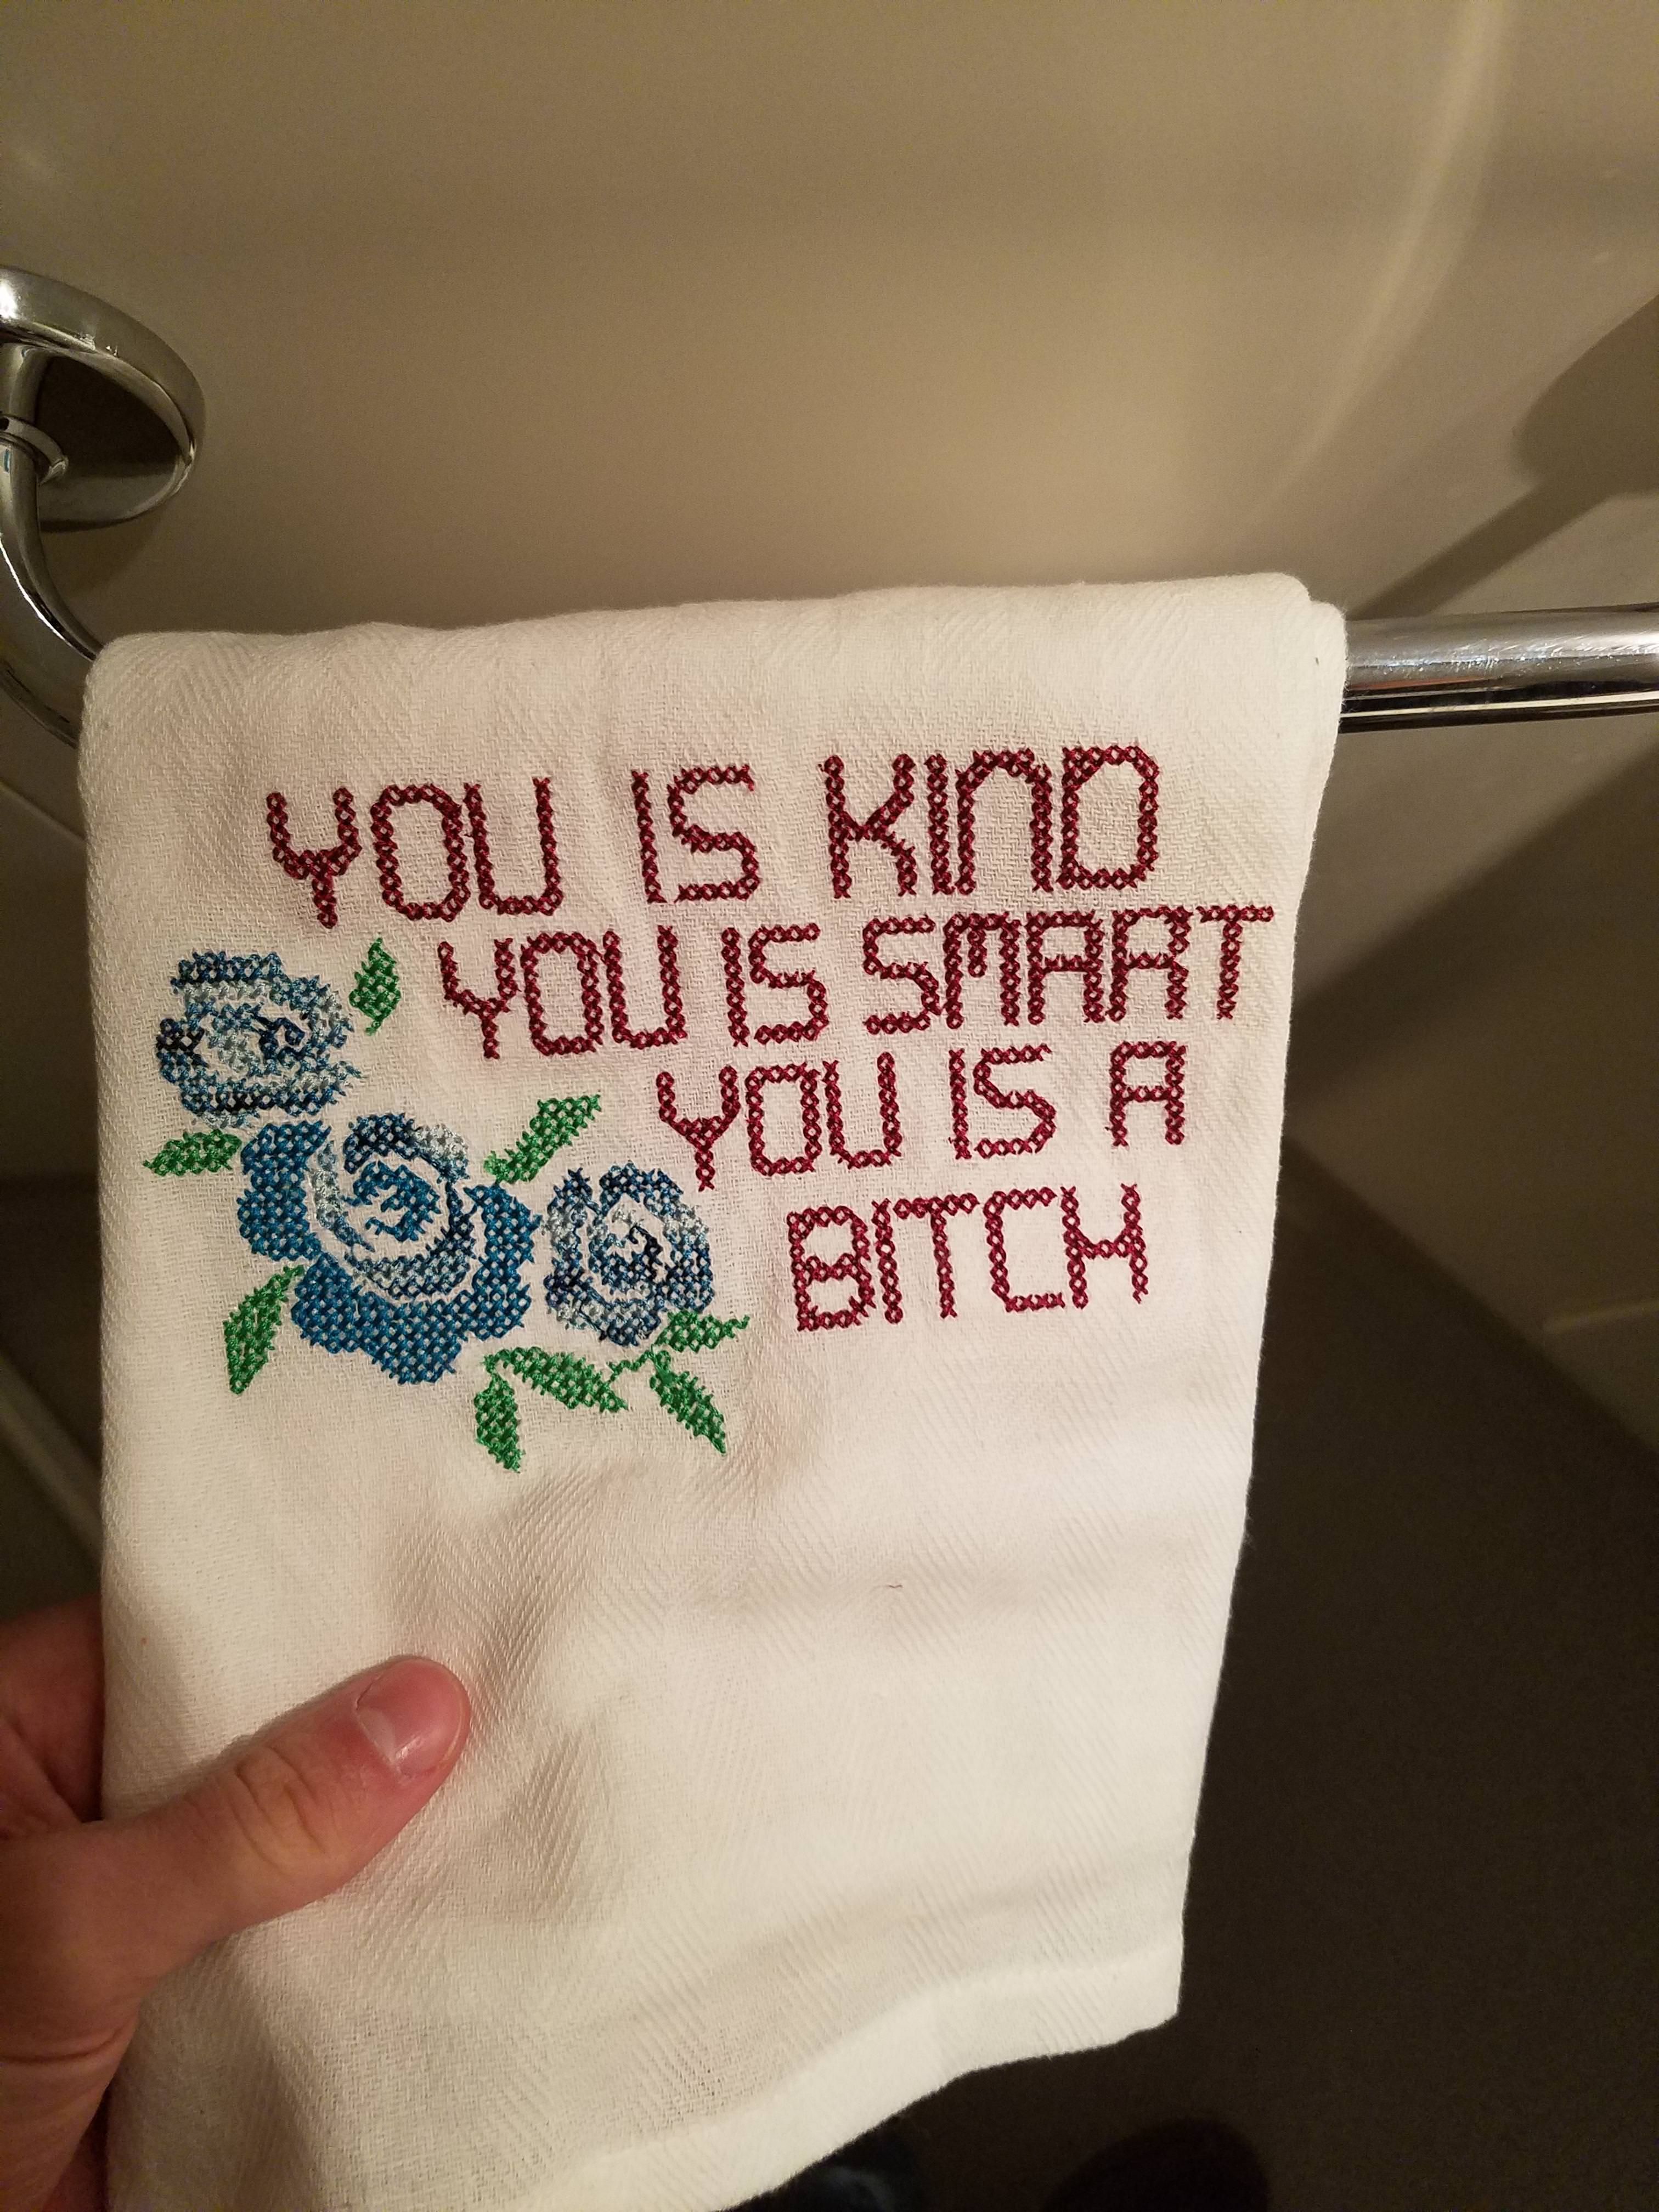 My girlfriend bought this hand towel at a street festival